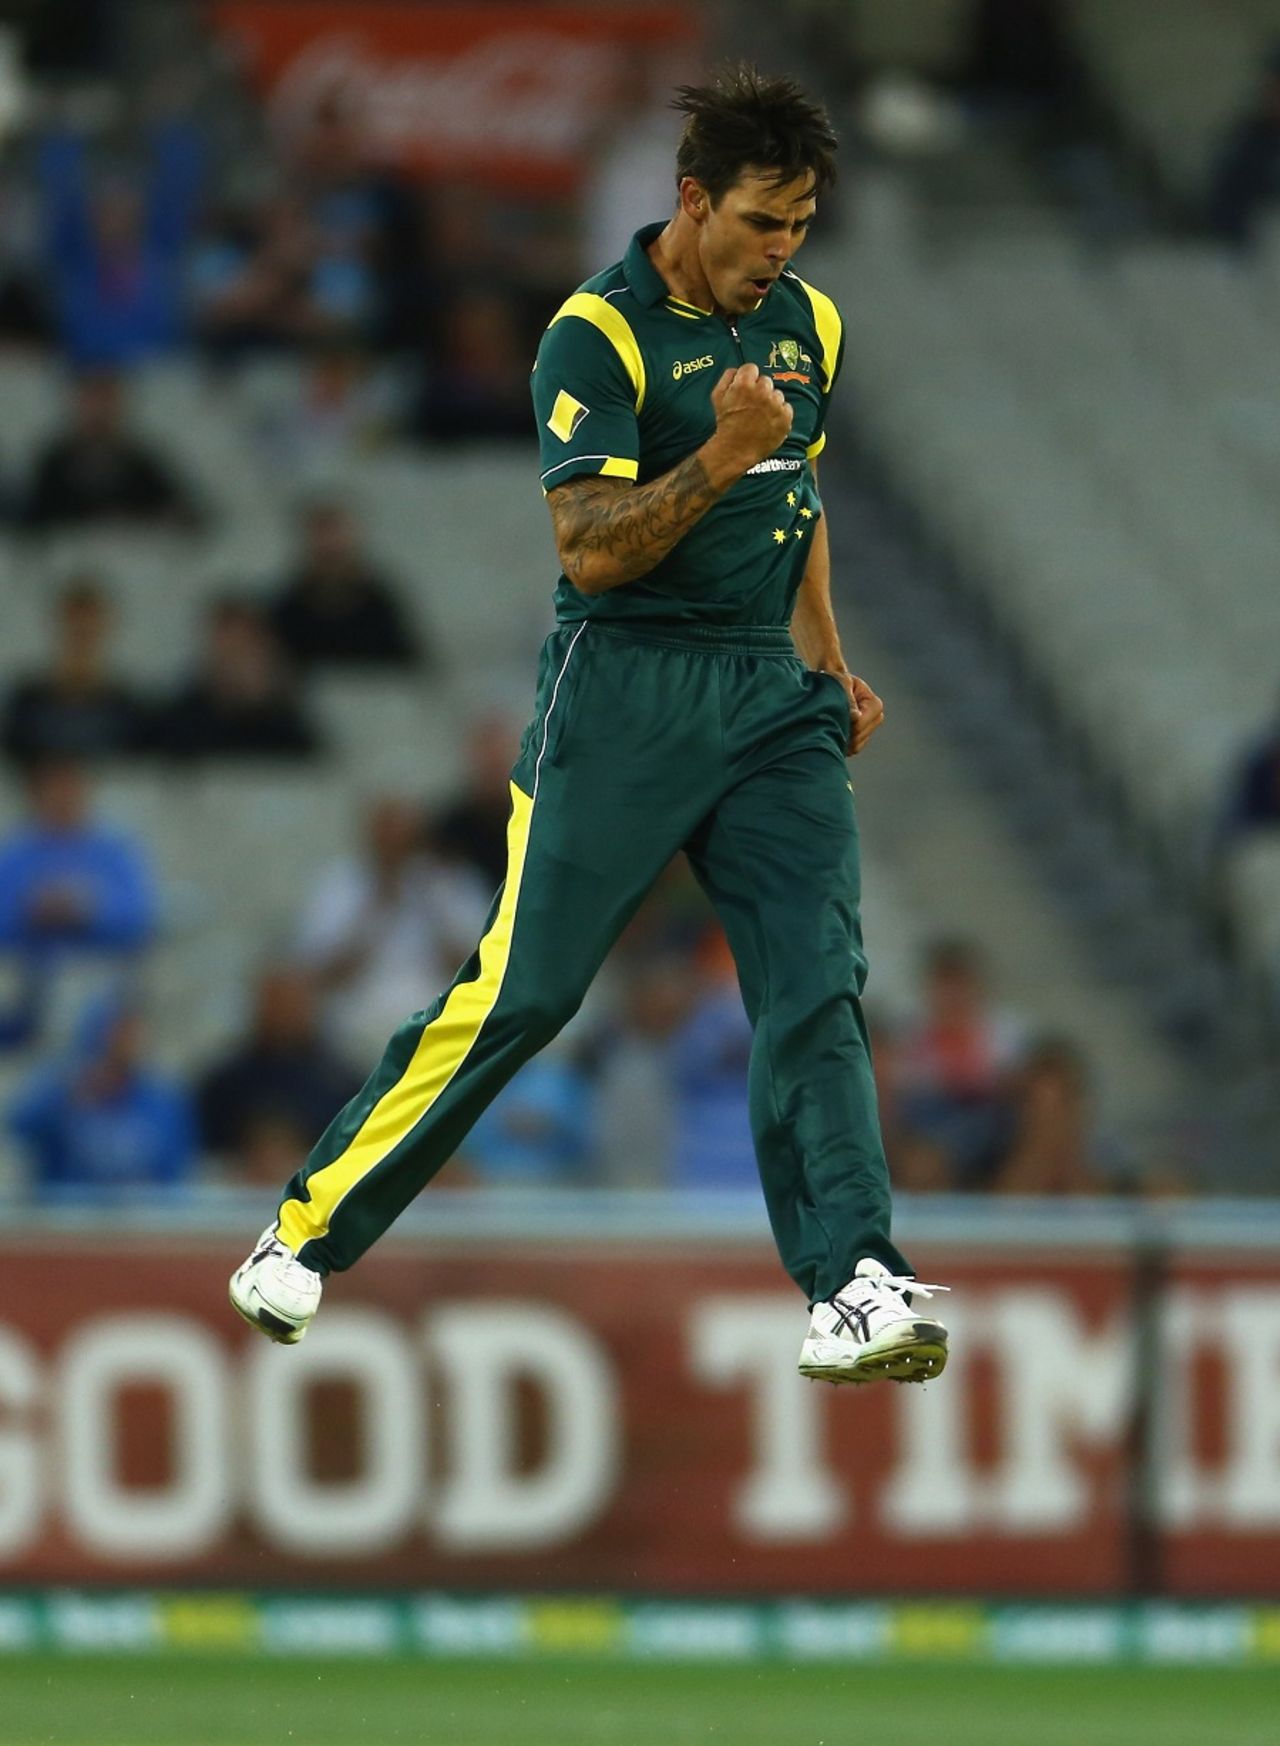 Mitchell Johnson is pumped up after taking a wicket, Australia v West Indies, 5th ODI, Melbourne, February 10, 2013